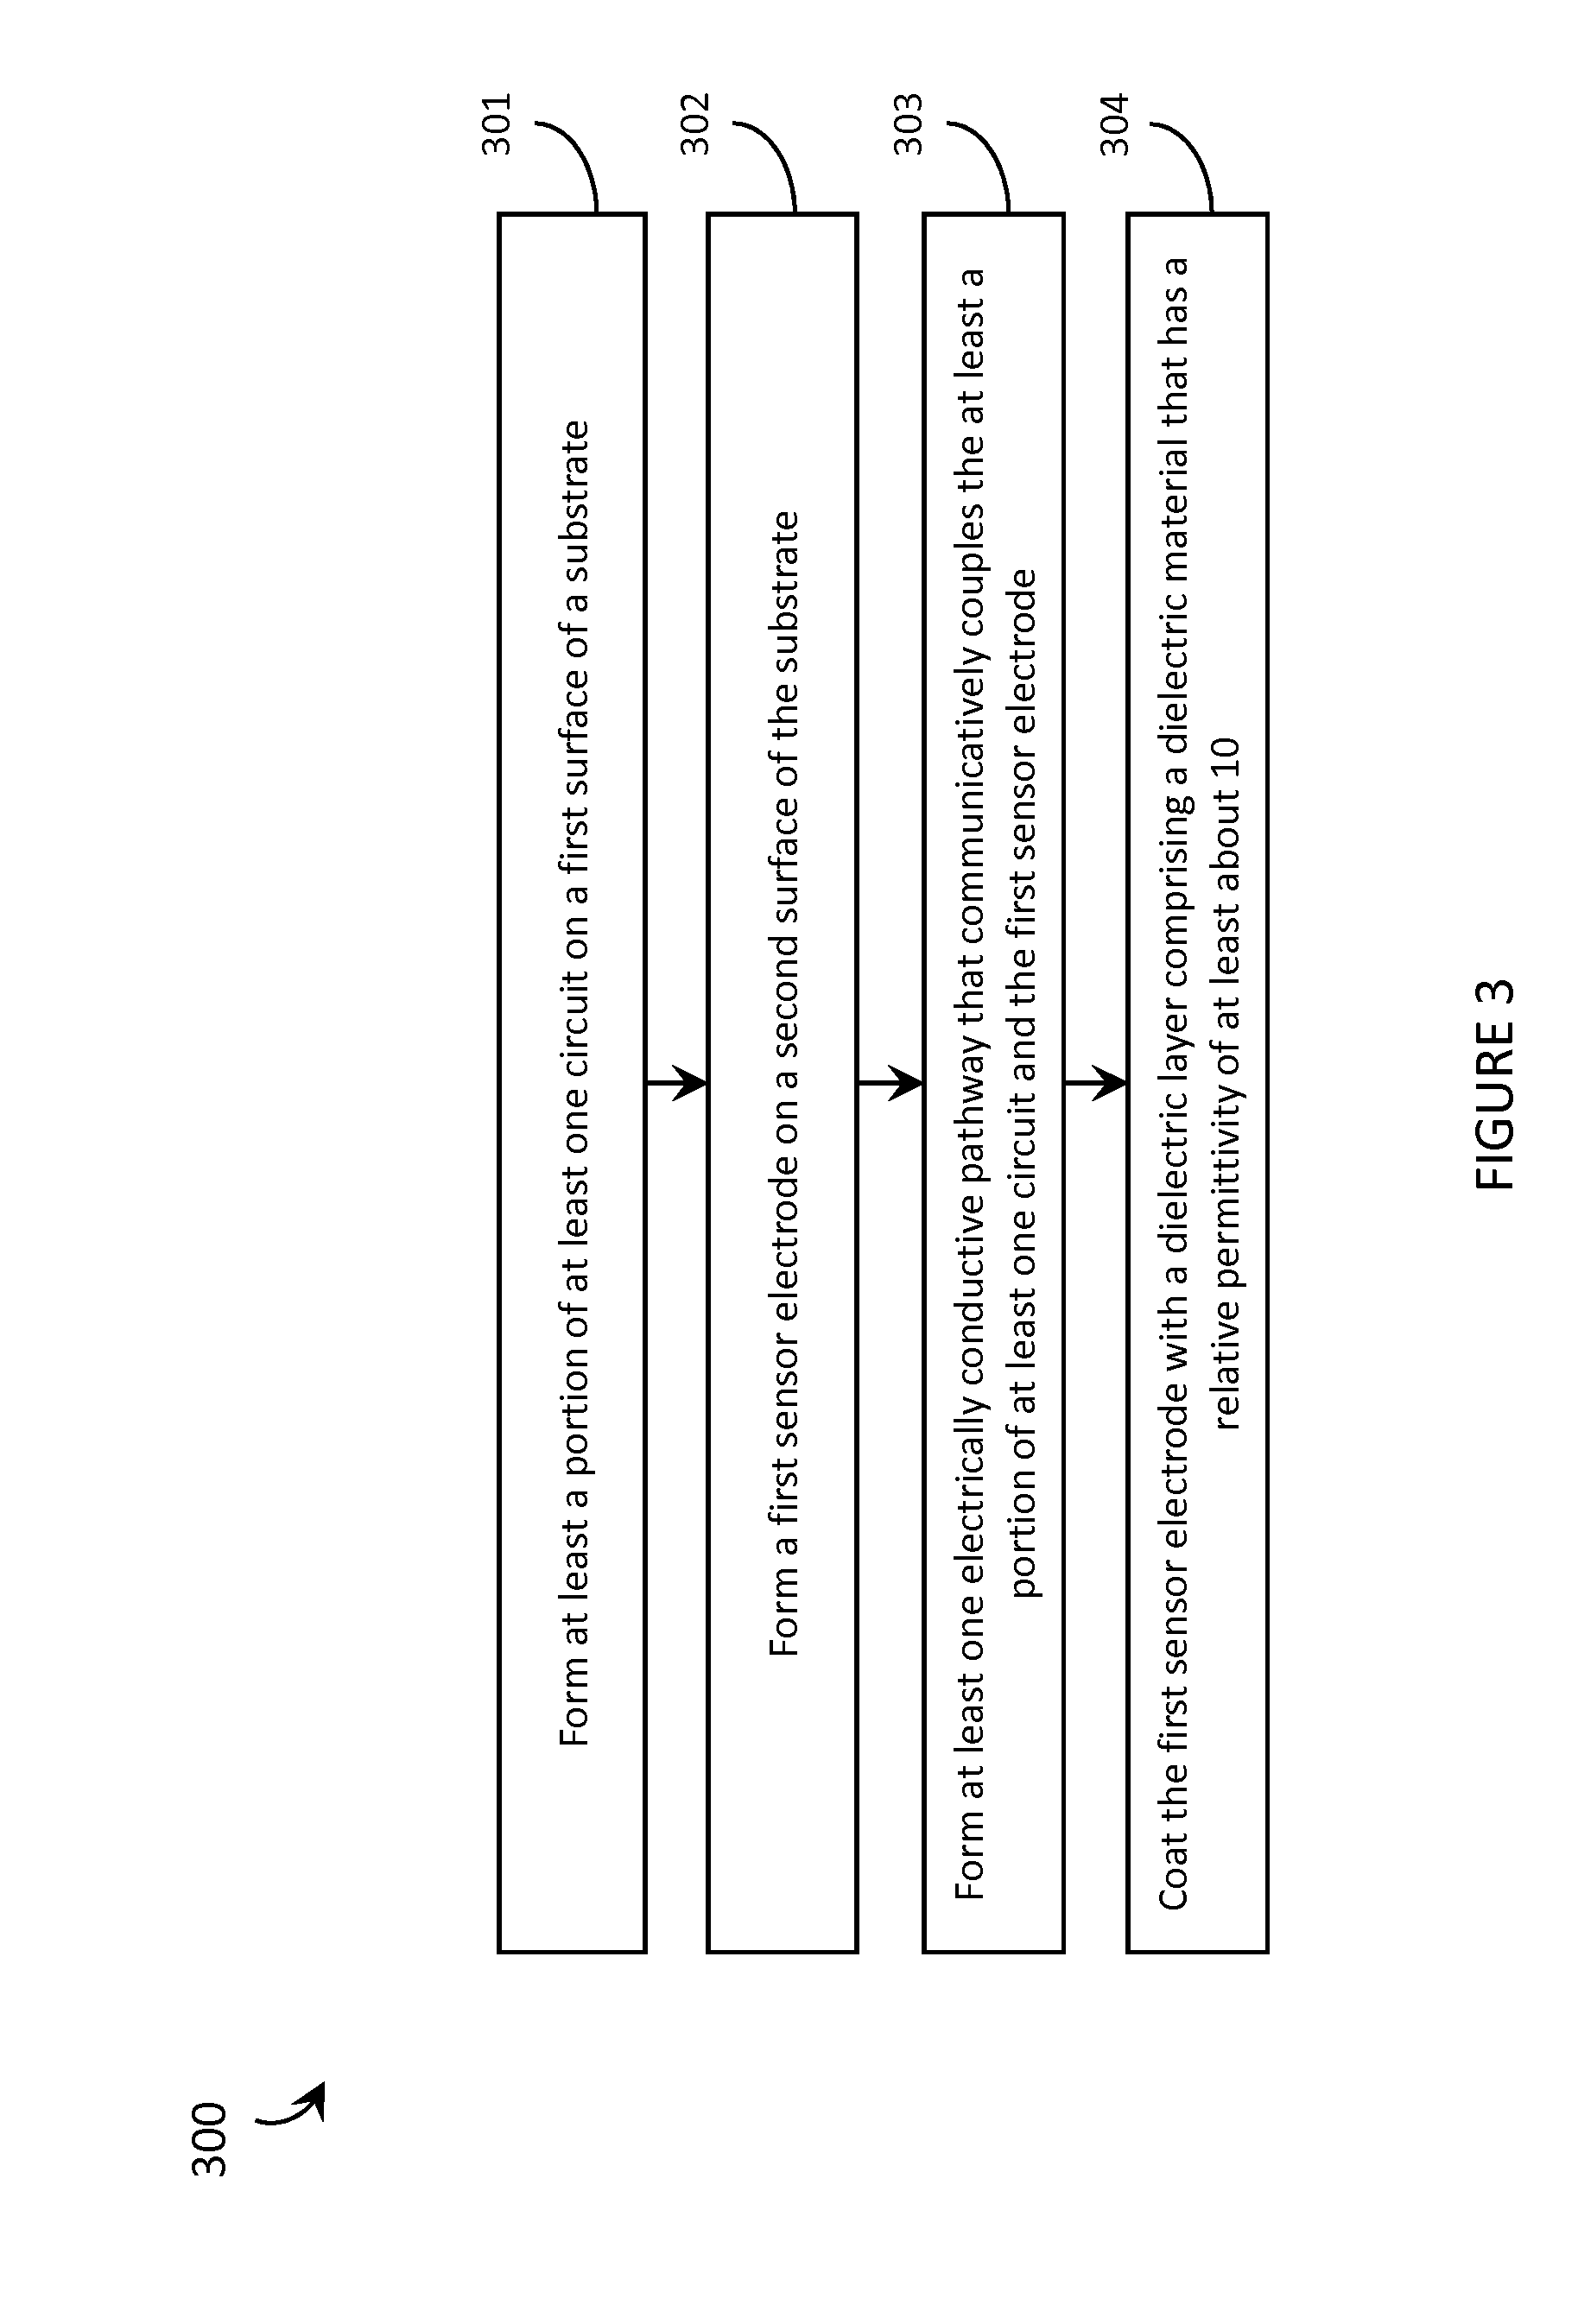 Systems, articles, and methods for capacitive electromyography sensors